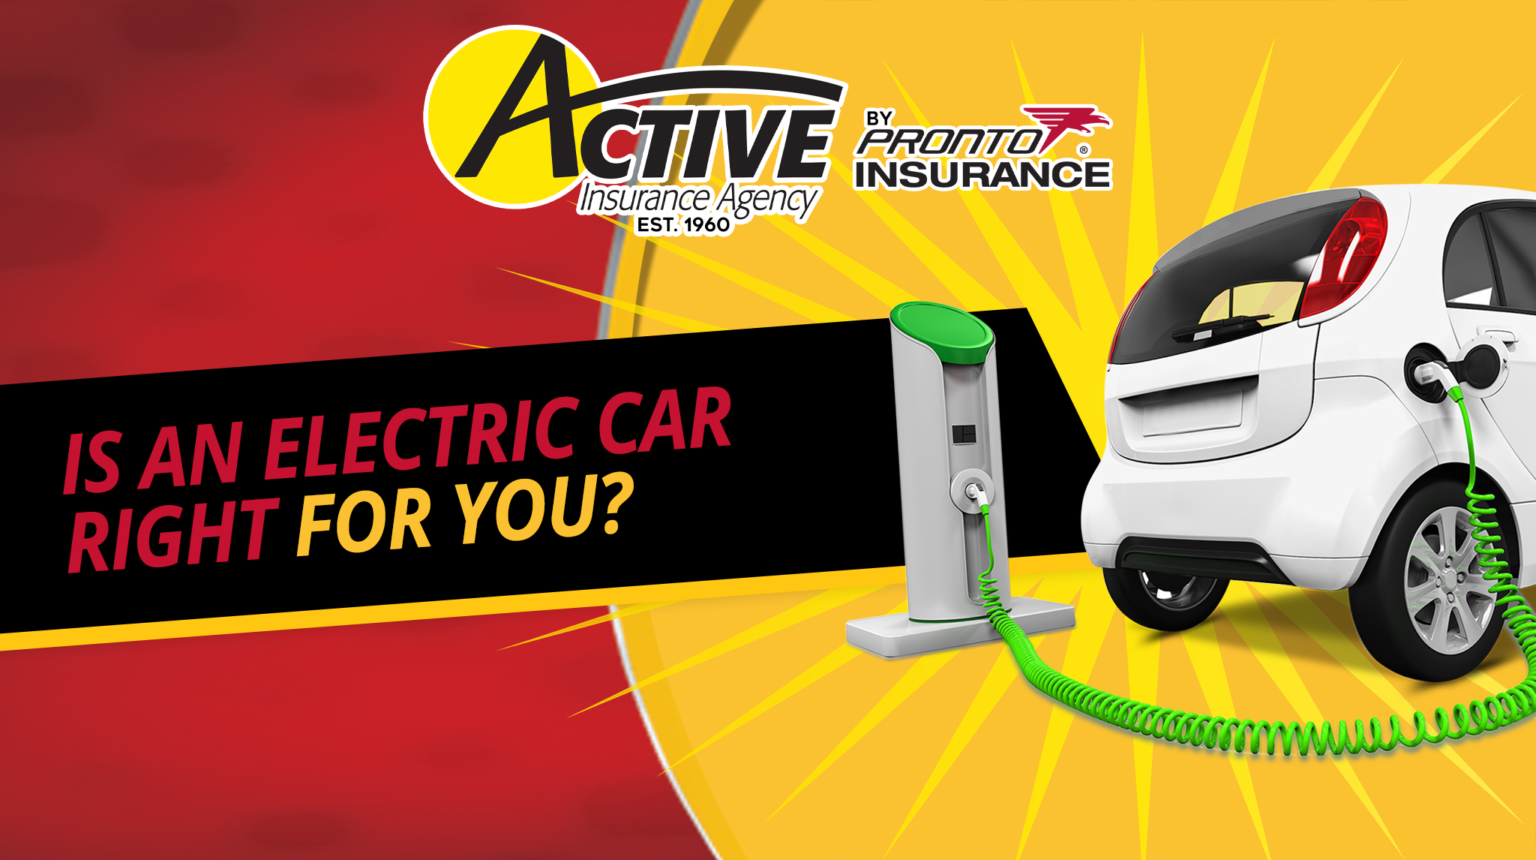 Is an Electric Car Right for You? Active Insurance by Pronto Insurance